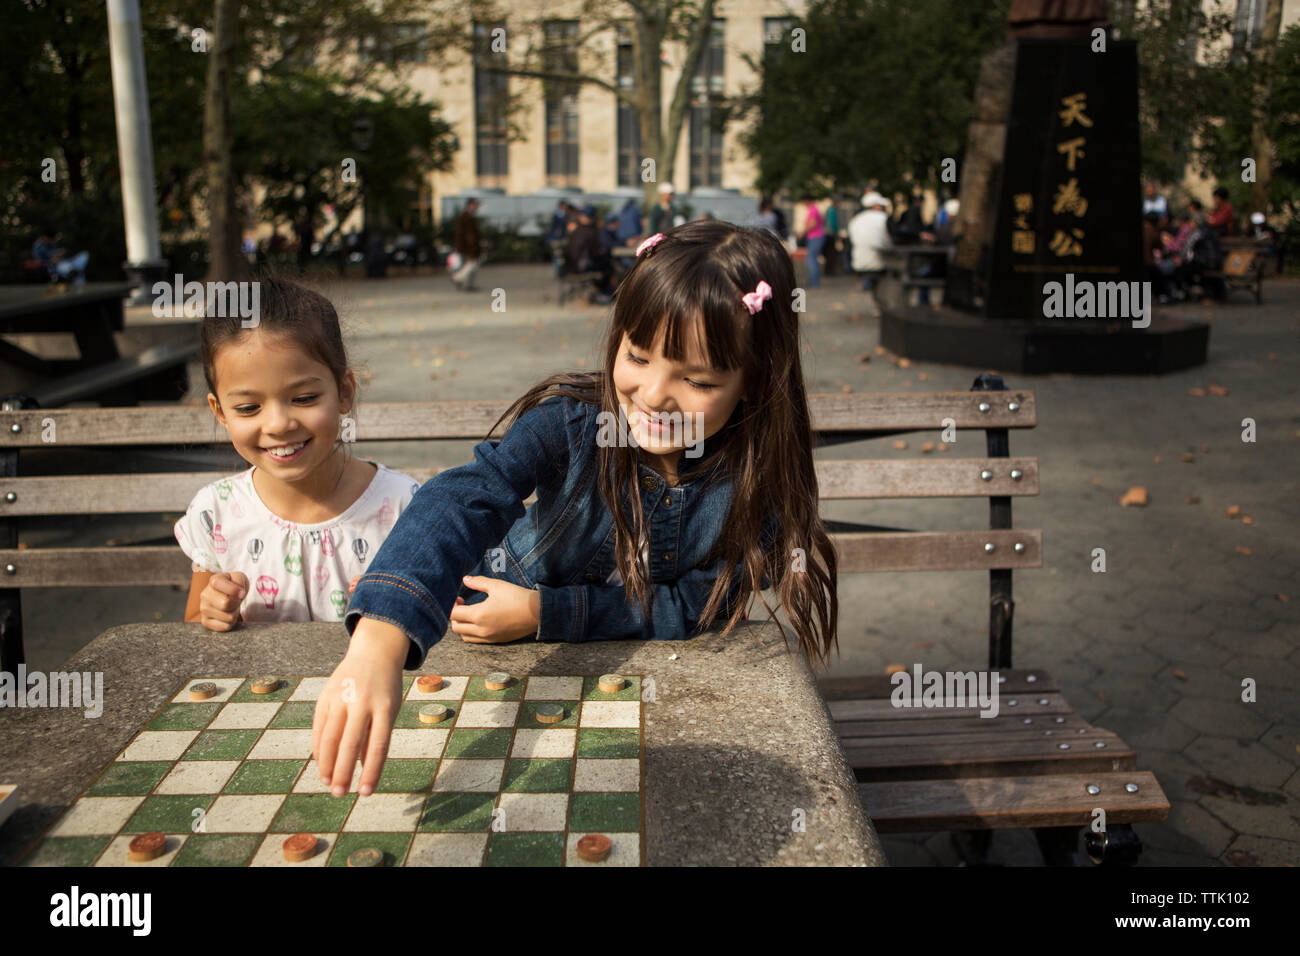 Father playing checkers game in park Banque D'Images